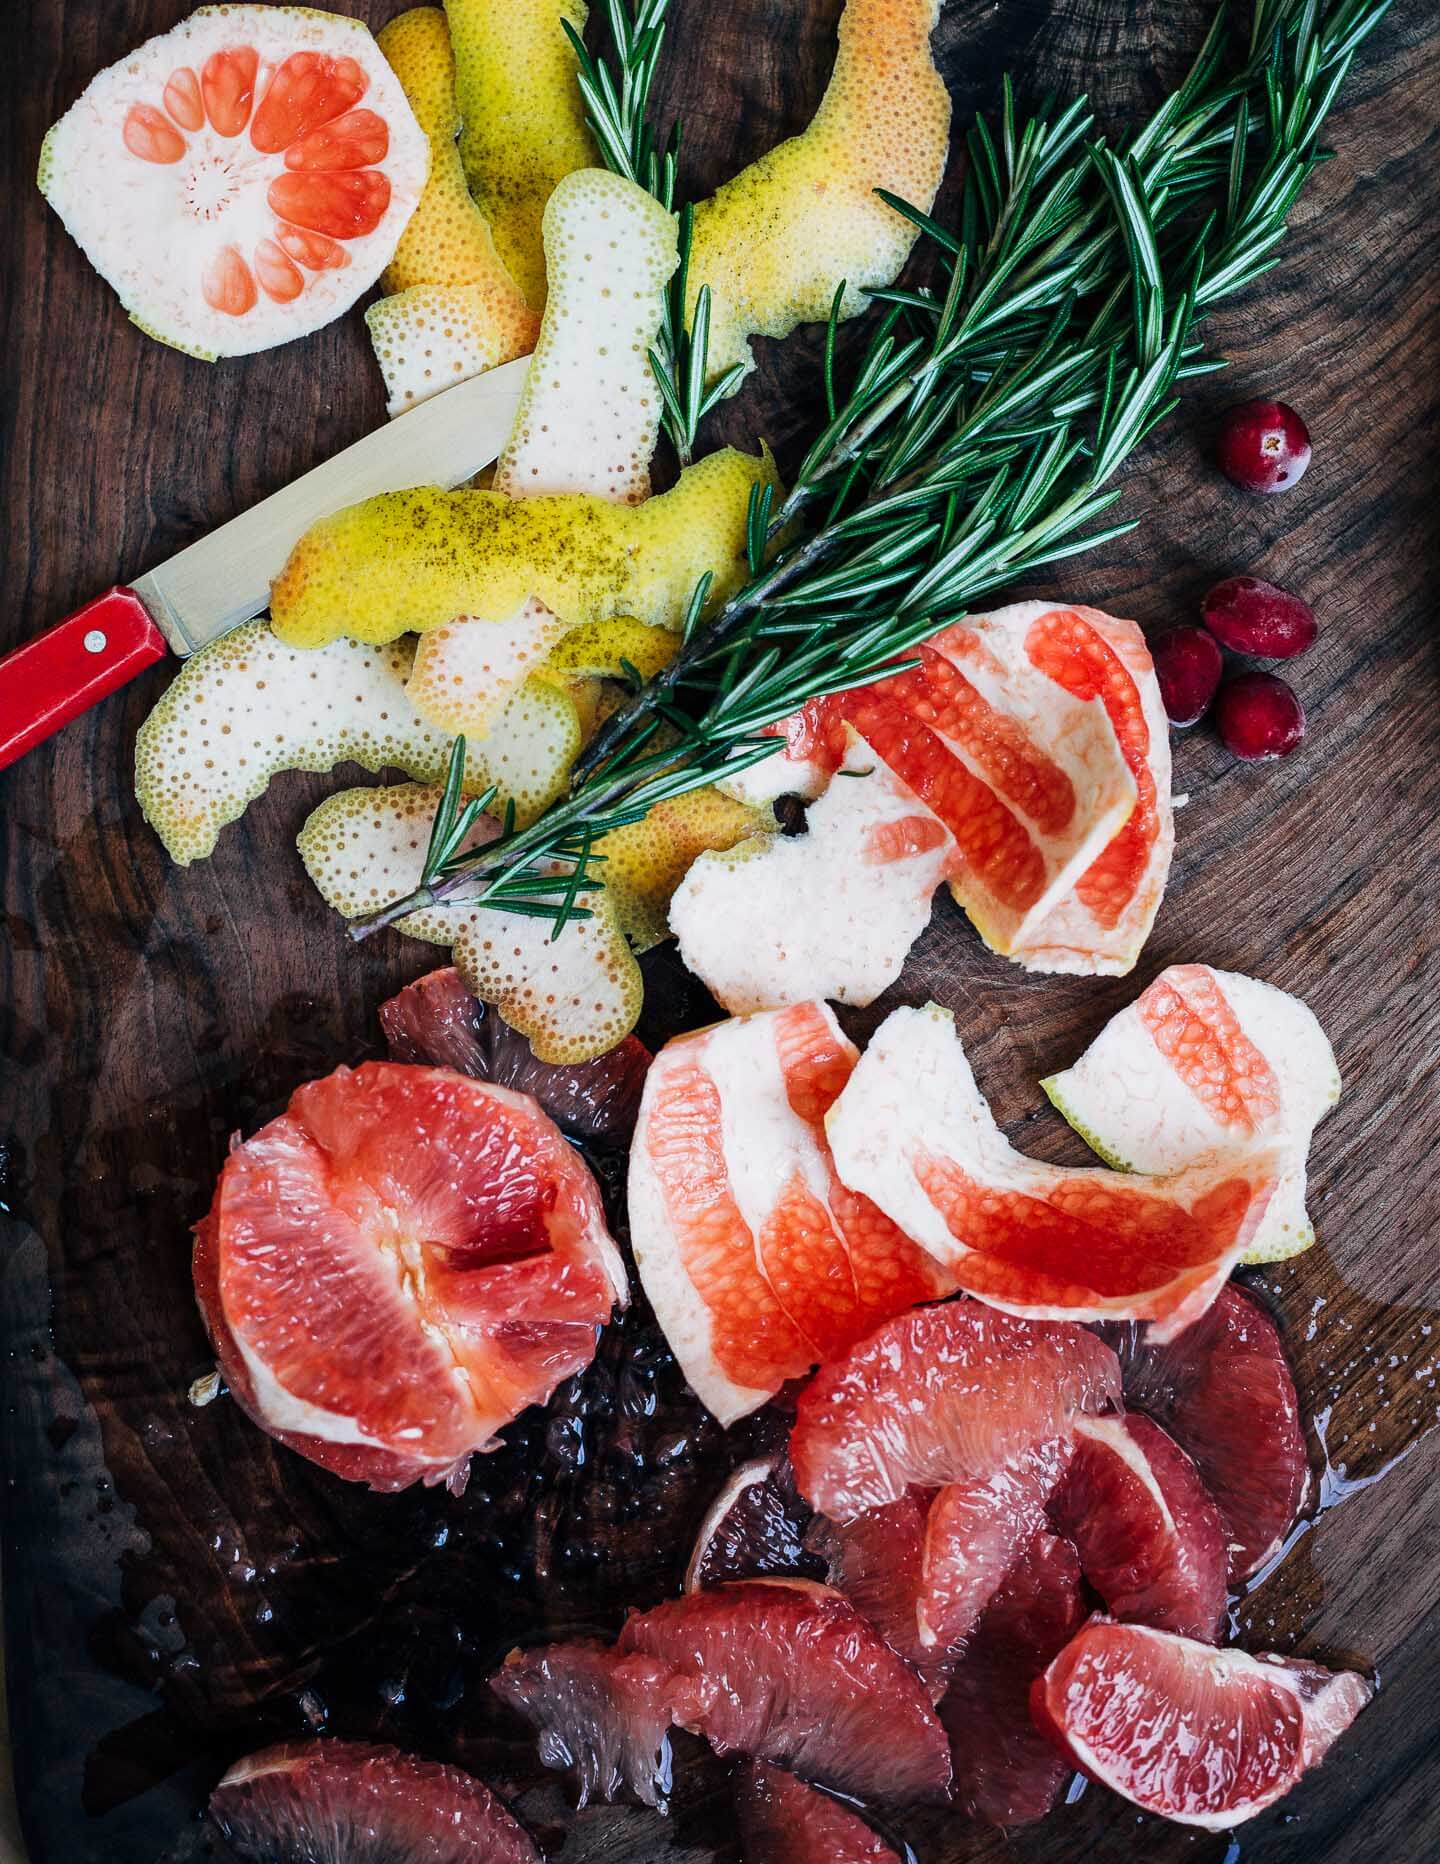 Ruby red grapefruit and fresh rosemary make for a vibrant cranberry sauce. 